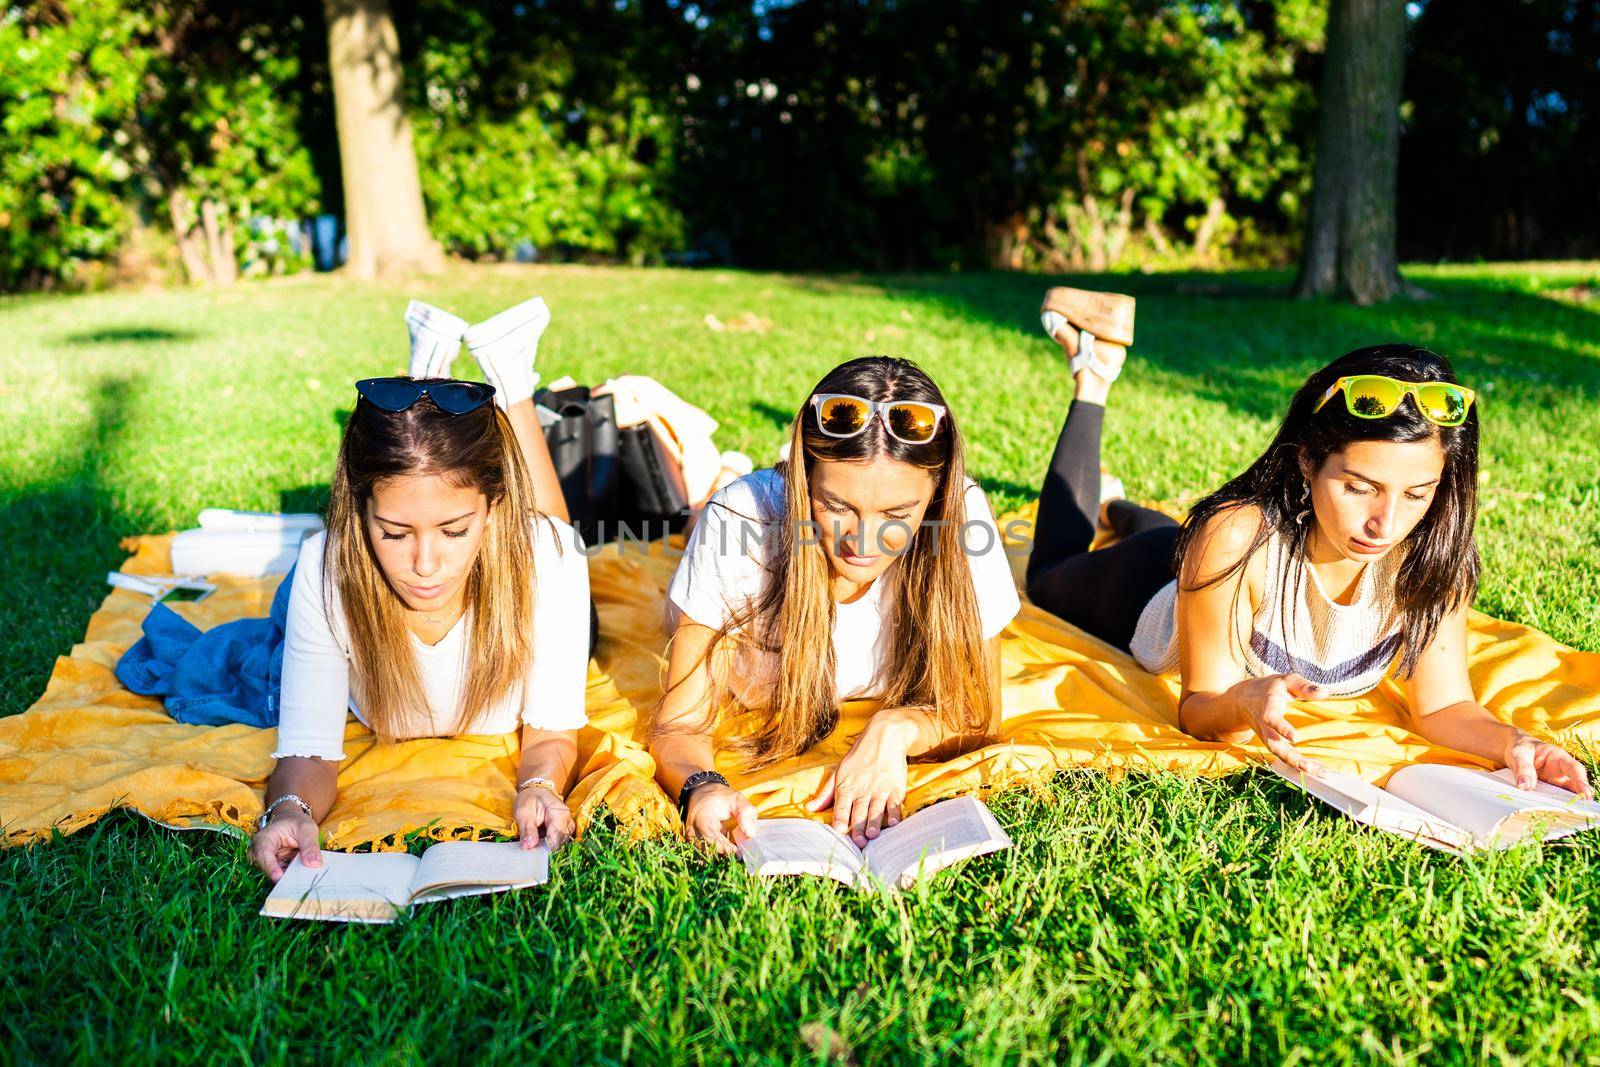 Three young women students spending time lying on meadow in city park at sunset or dawn reading book to learn university school lesson. Girl relaxing in city park enjoying preferred romance tale by robbyfontanesi